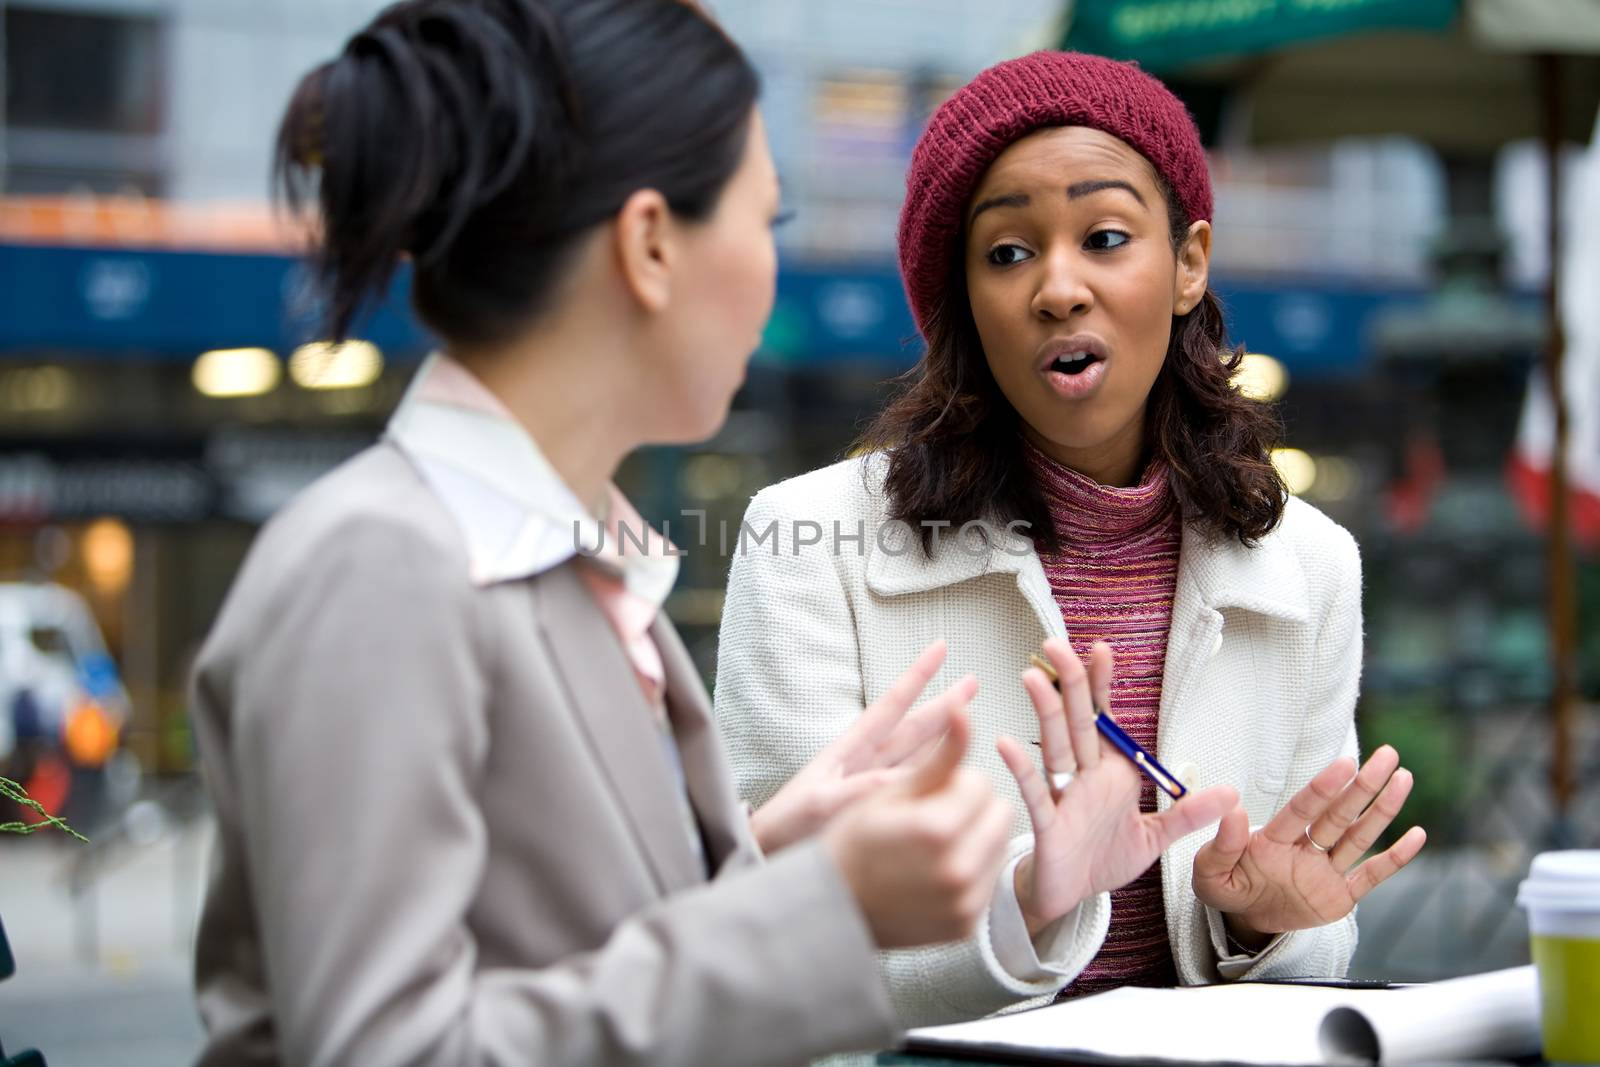 Two business women having a casual meeting or discussion in the city. 